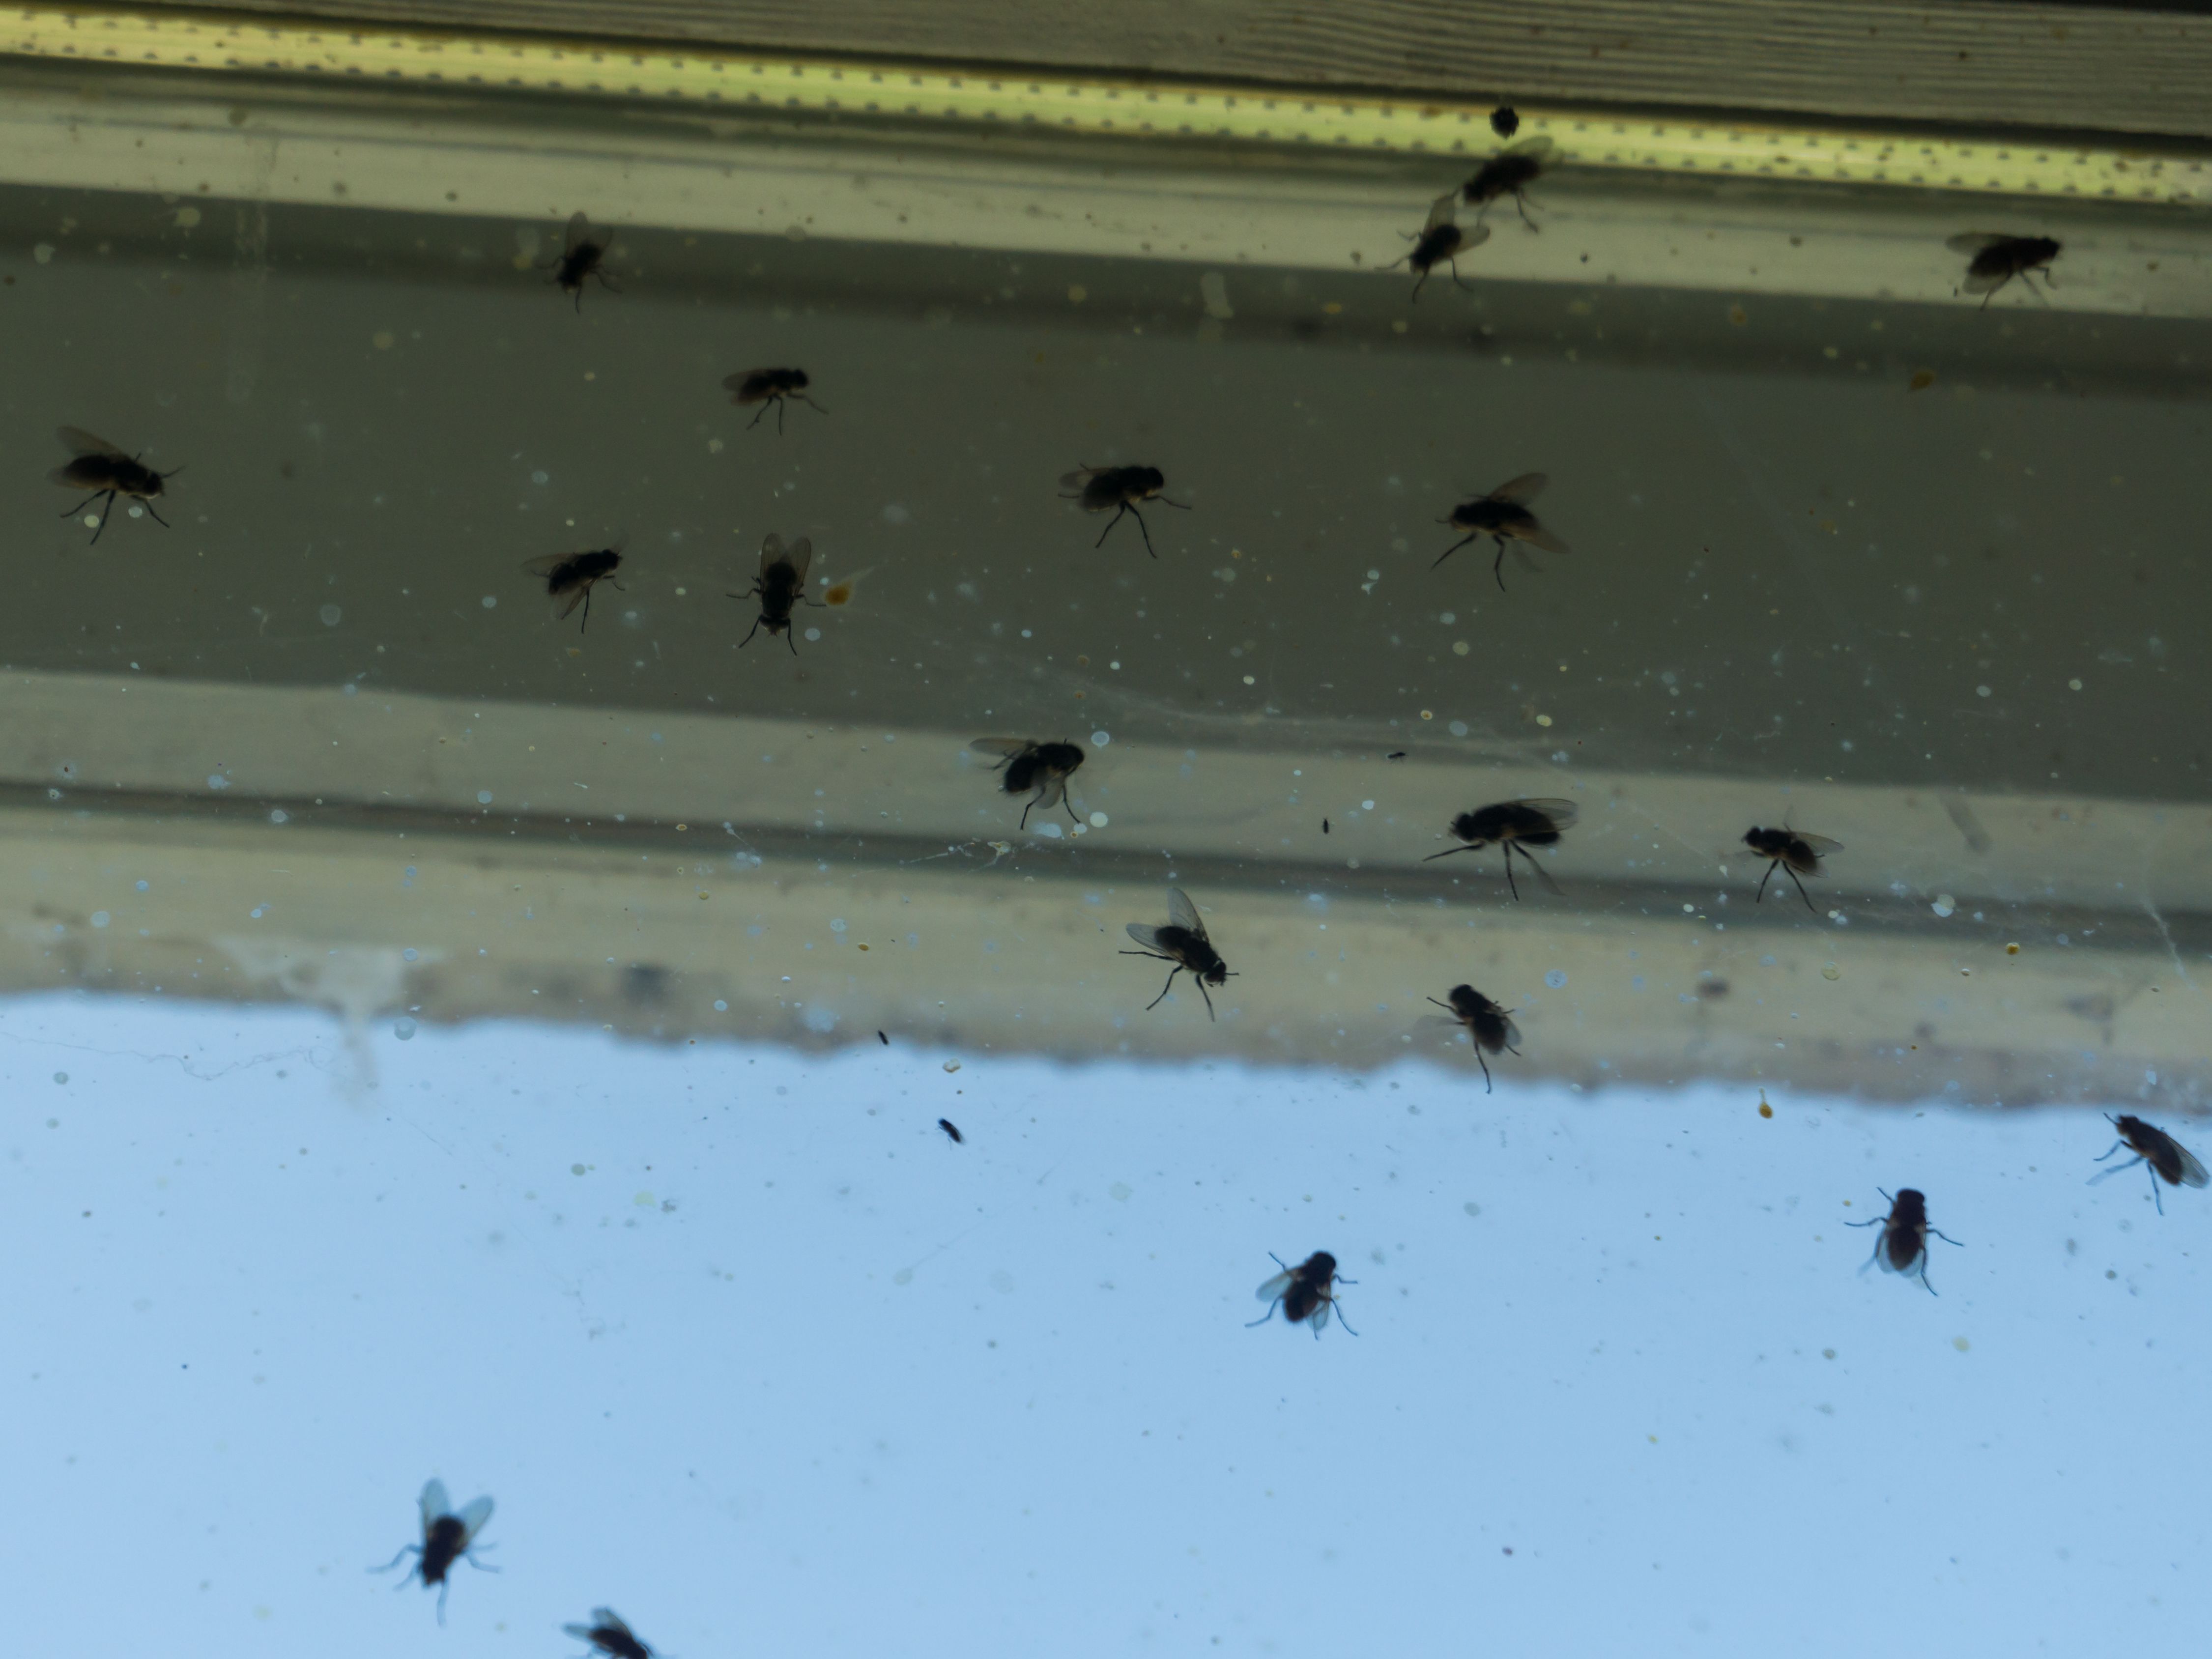 https://hips.hearstapps.com/hmg-prod/images/dirty-window-covered-with-flies-and-other-insects-royalty-free-image-1594592358.jpg